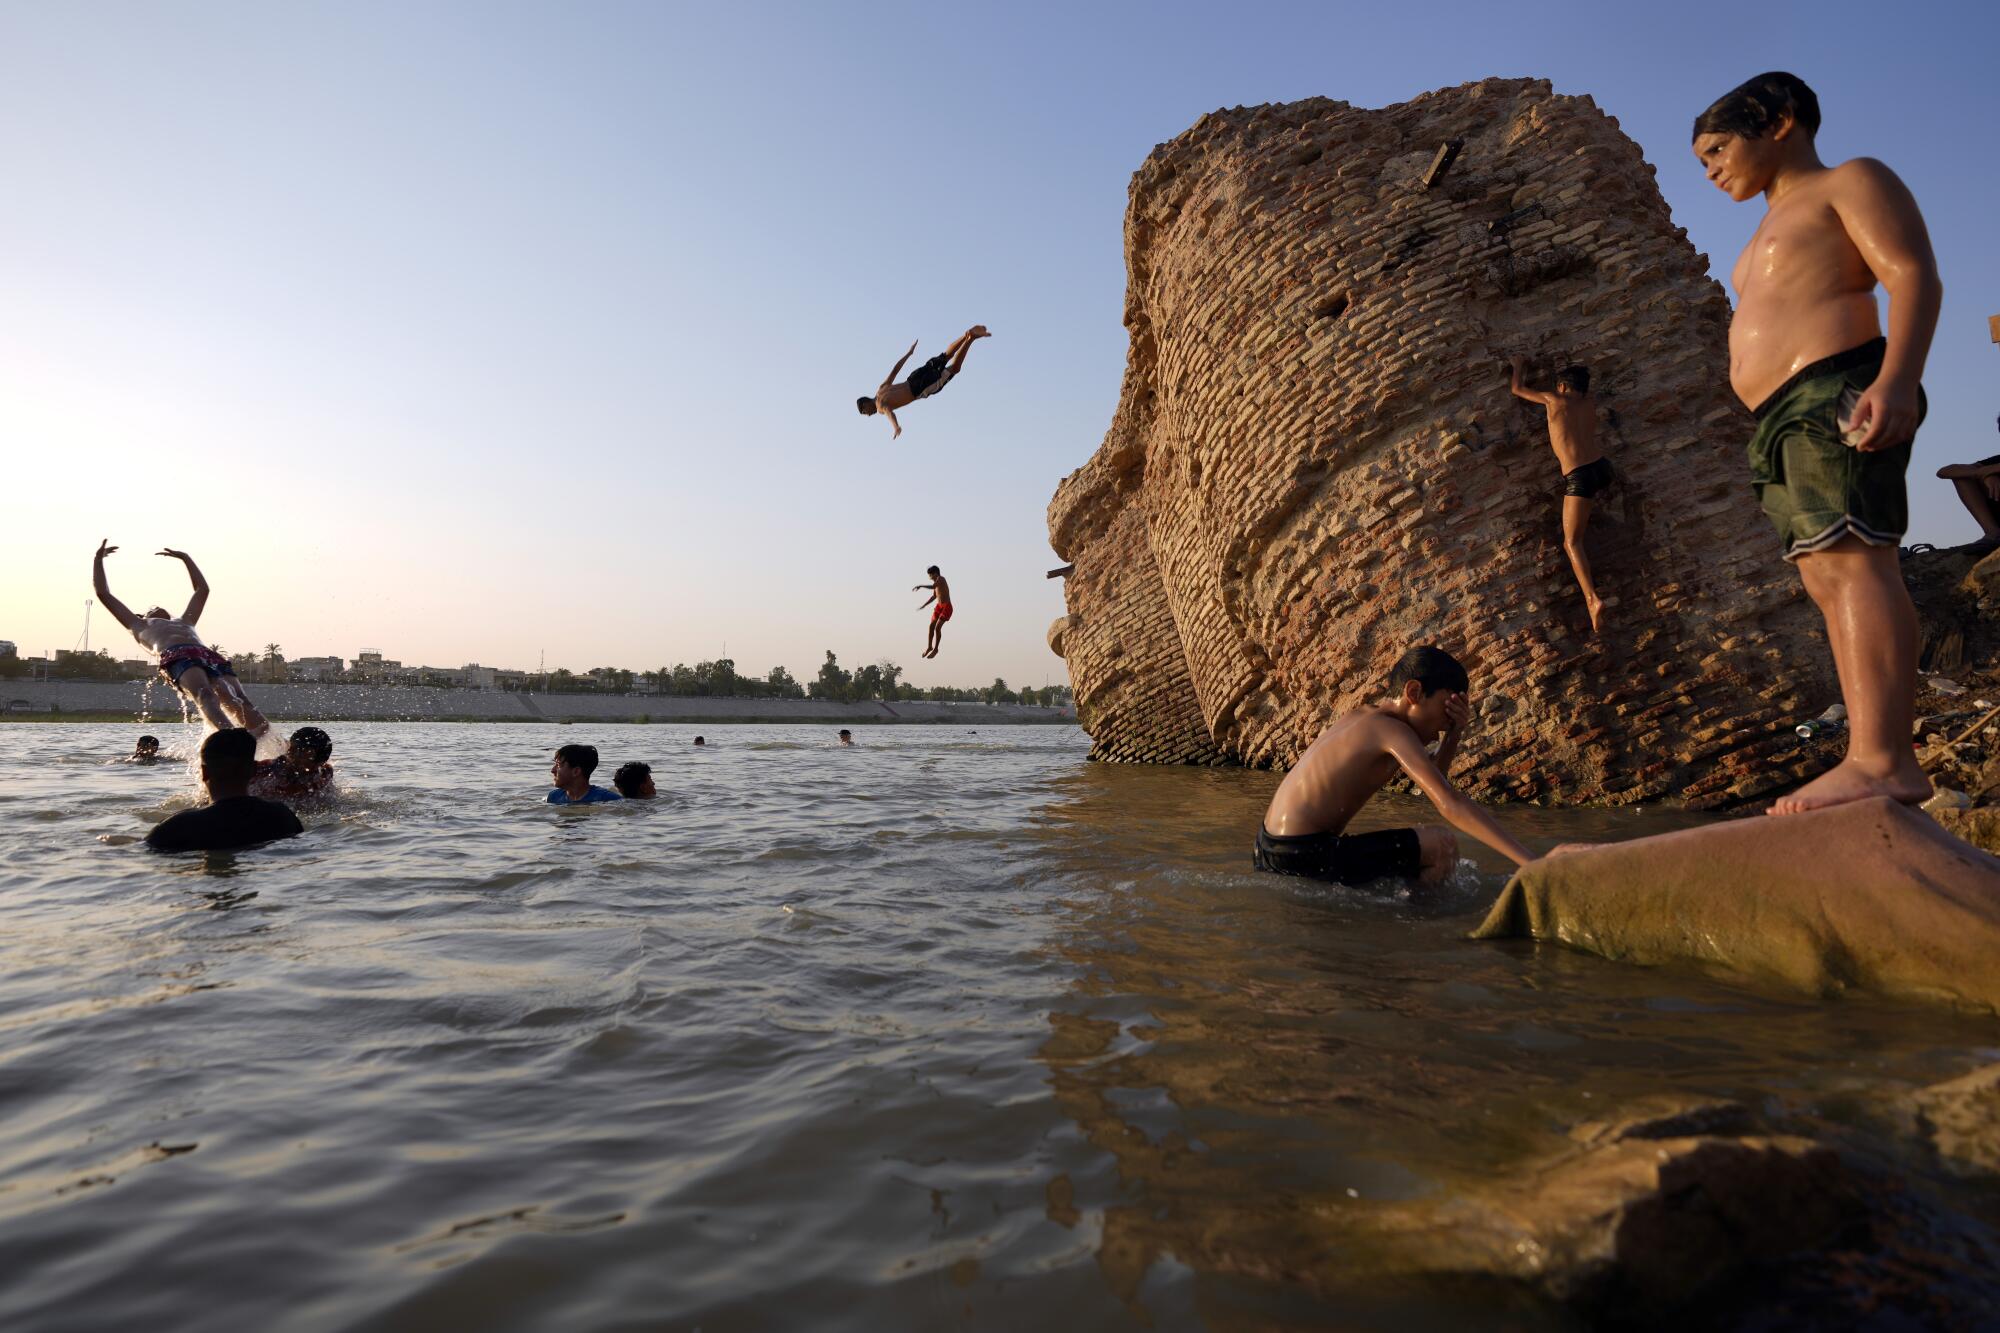 People jump into a river where people are swimming